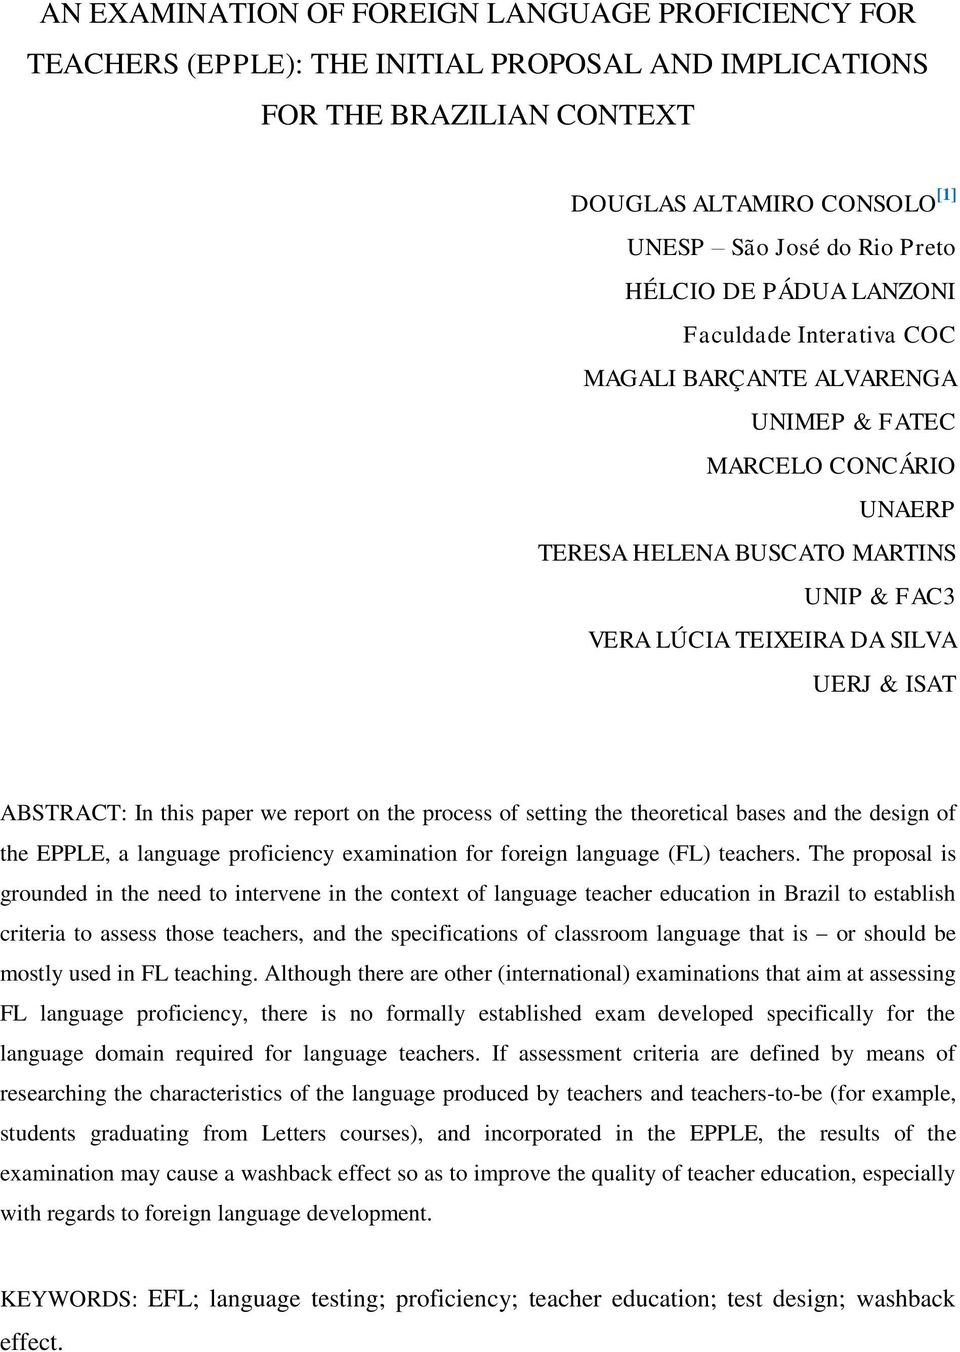 this paper we report on the process of setting the theoretical bases and the design of the EPPLE, a language proficiency examination for foreign language (FL) teachers.